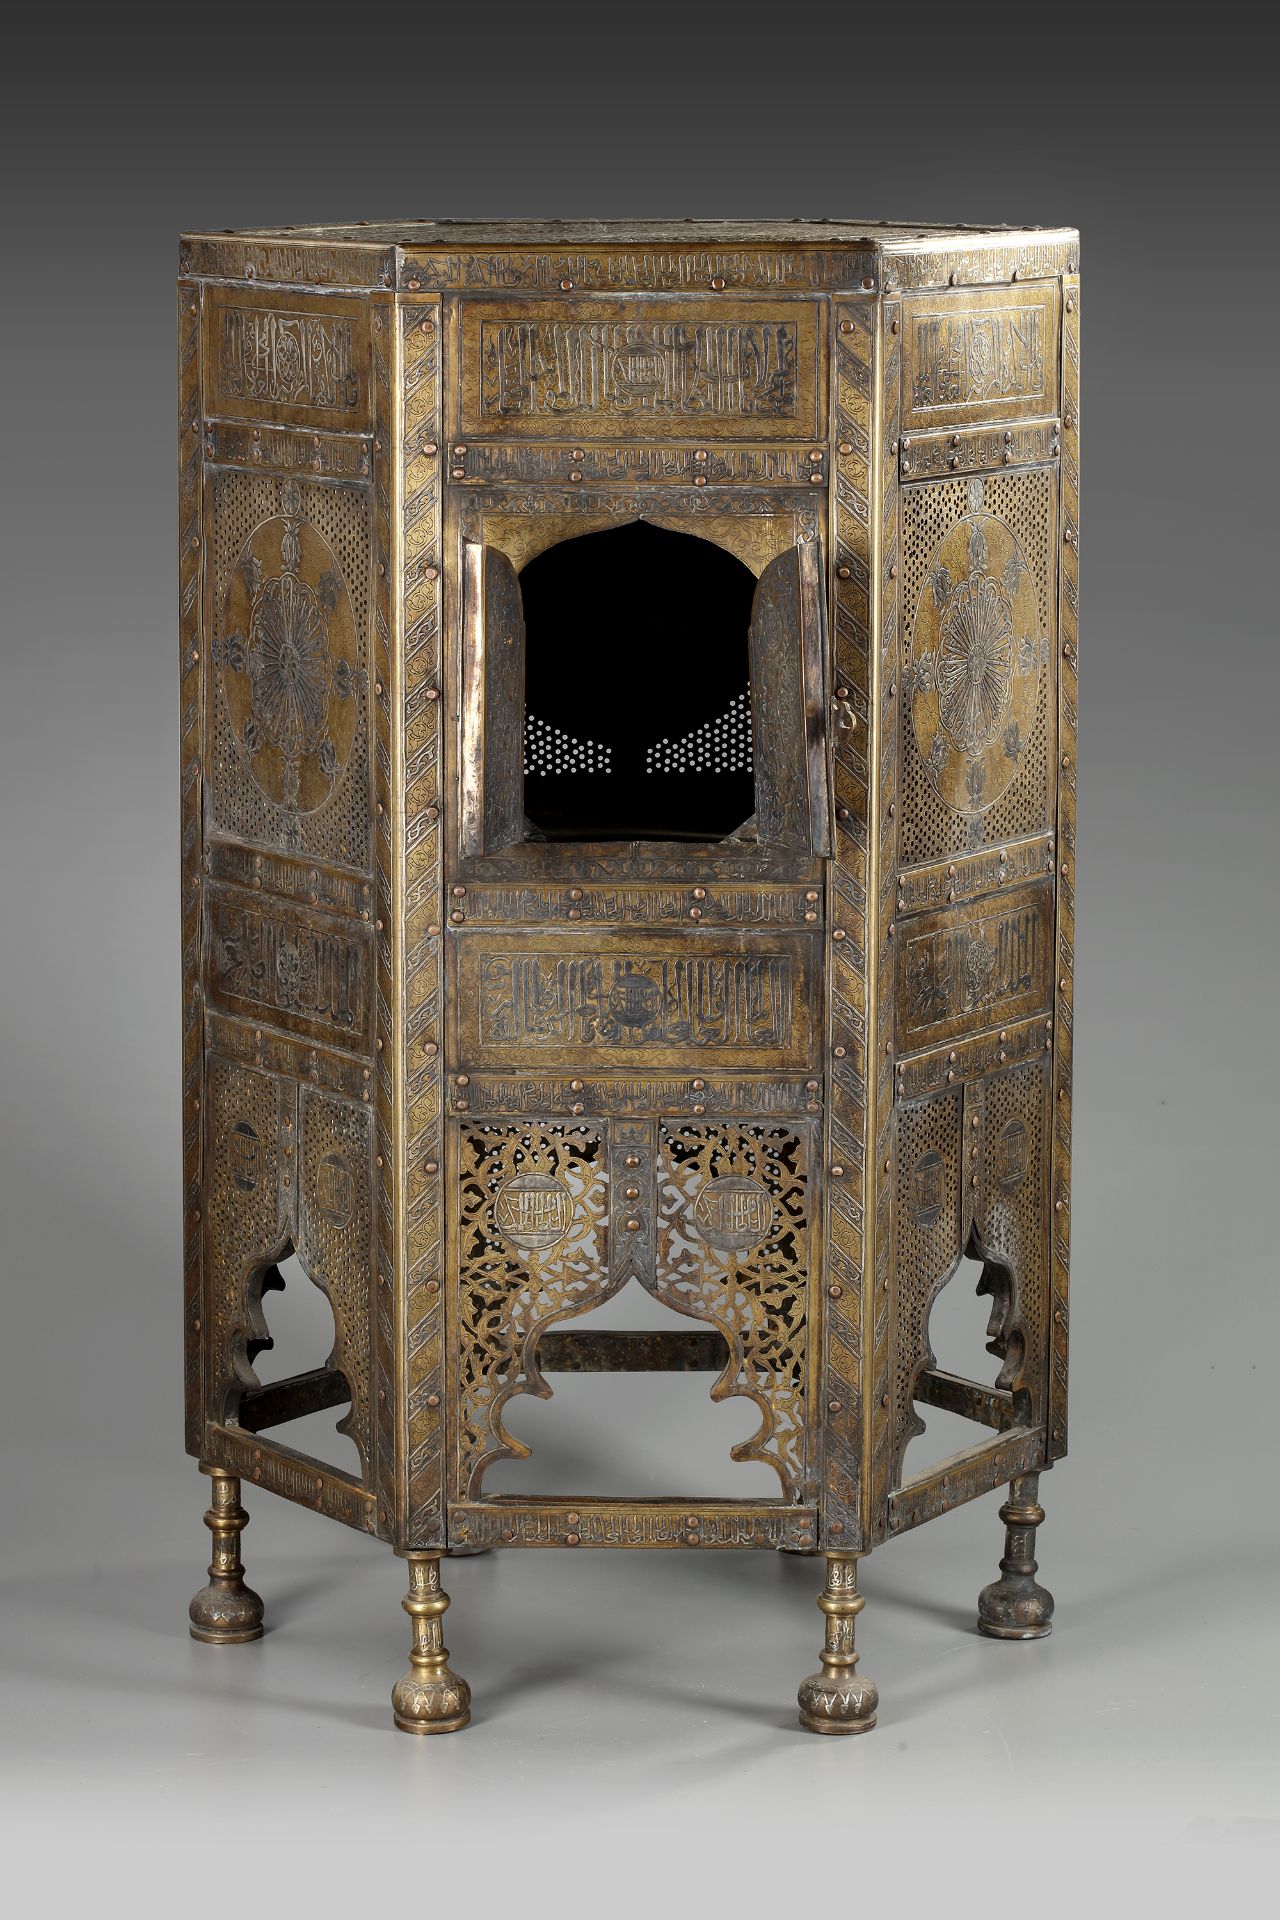 A LARGE CAIROWARE GOLD, SILVER AND COPPER INLAID BRASS KURSI, LATE 19TH CENTURY - Image 3 of 5